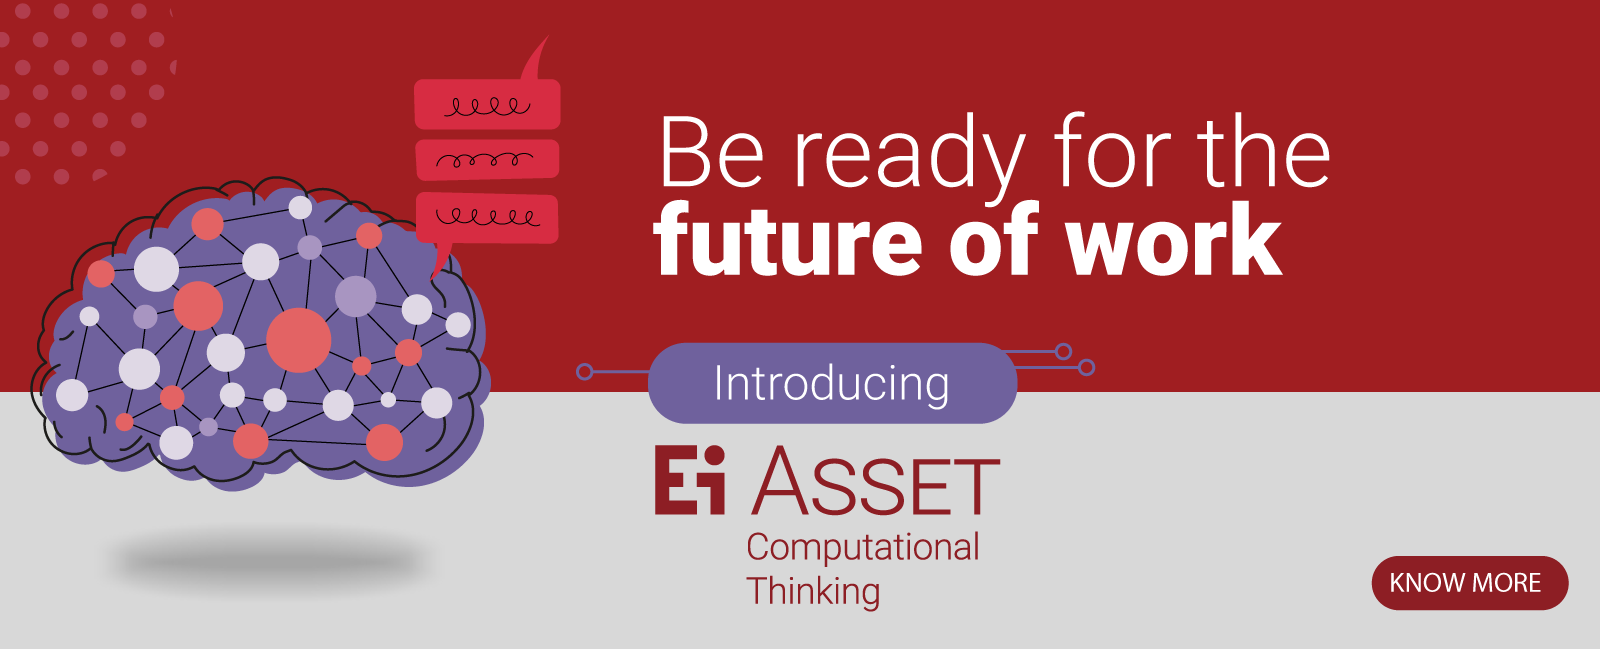 Ei-Study Be ready for the future of work